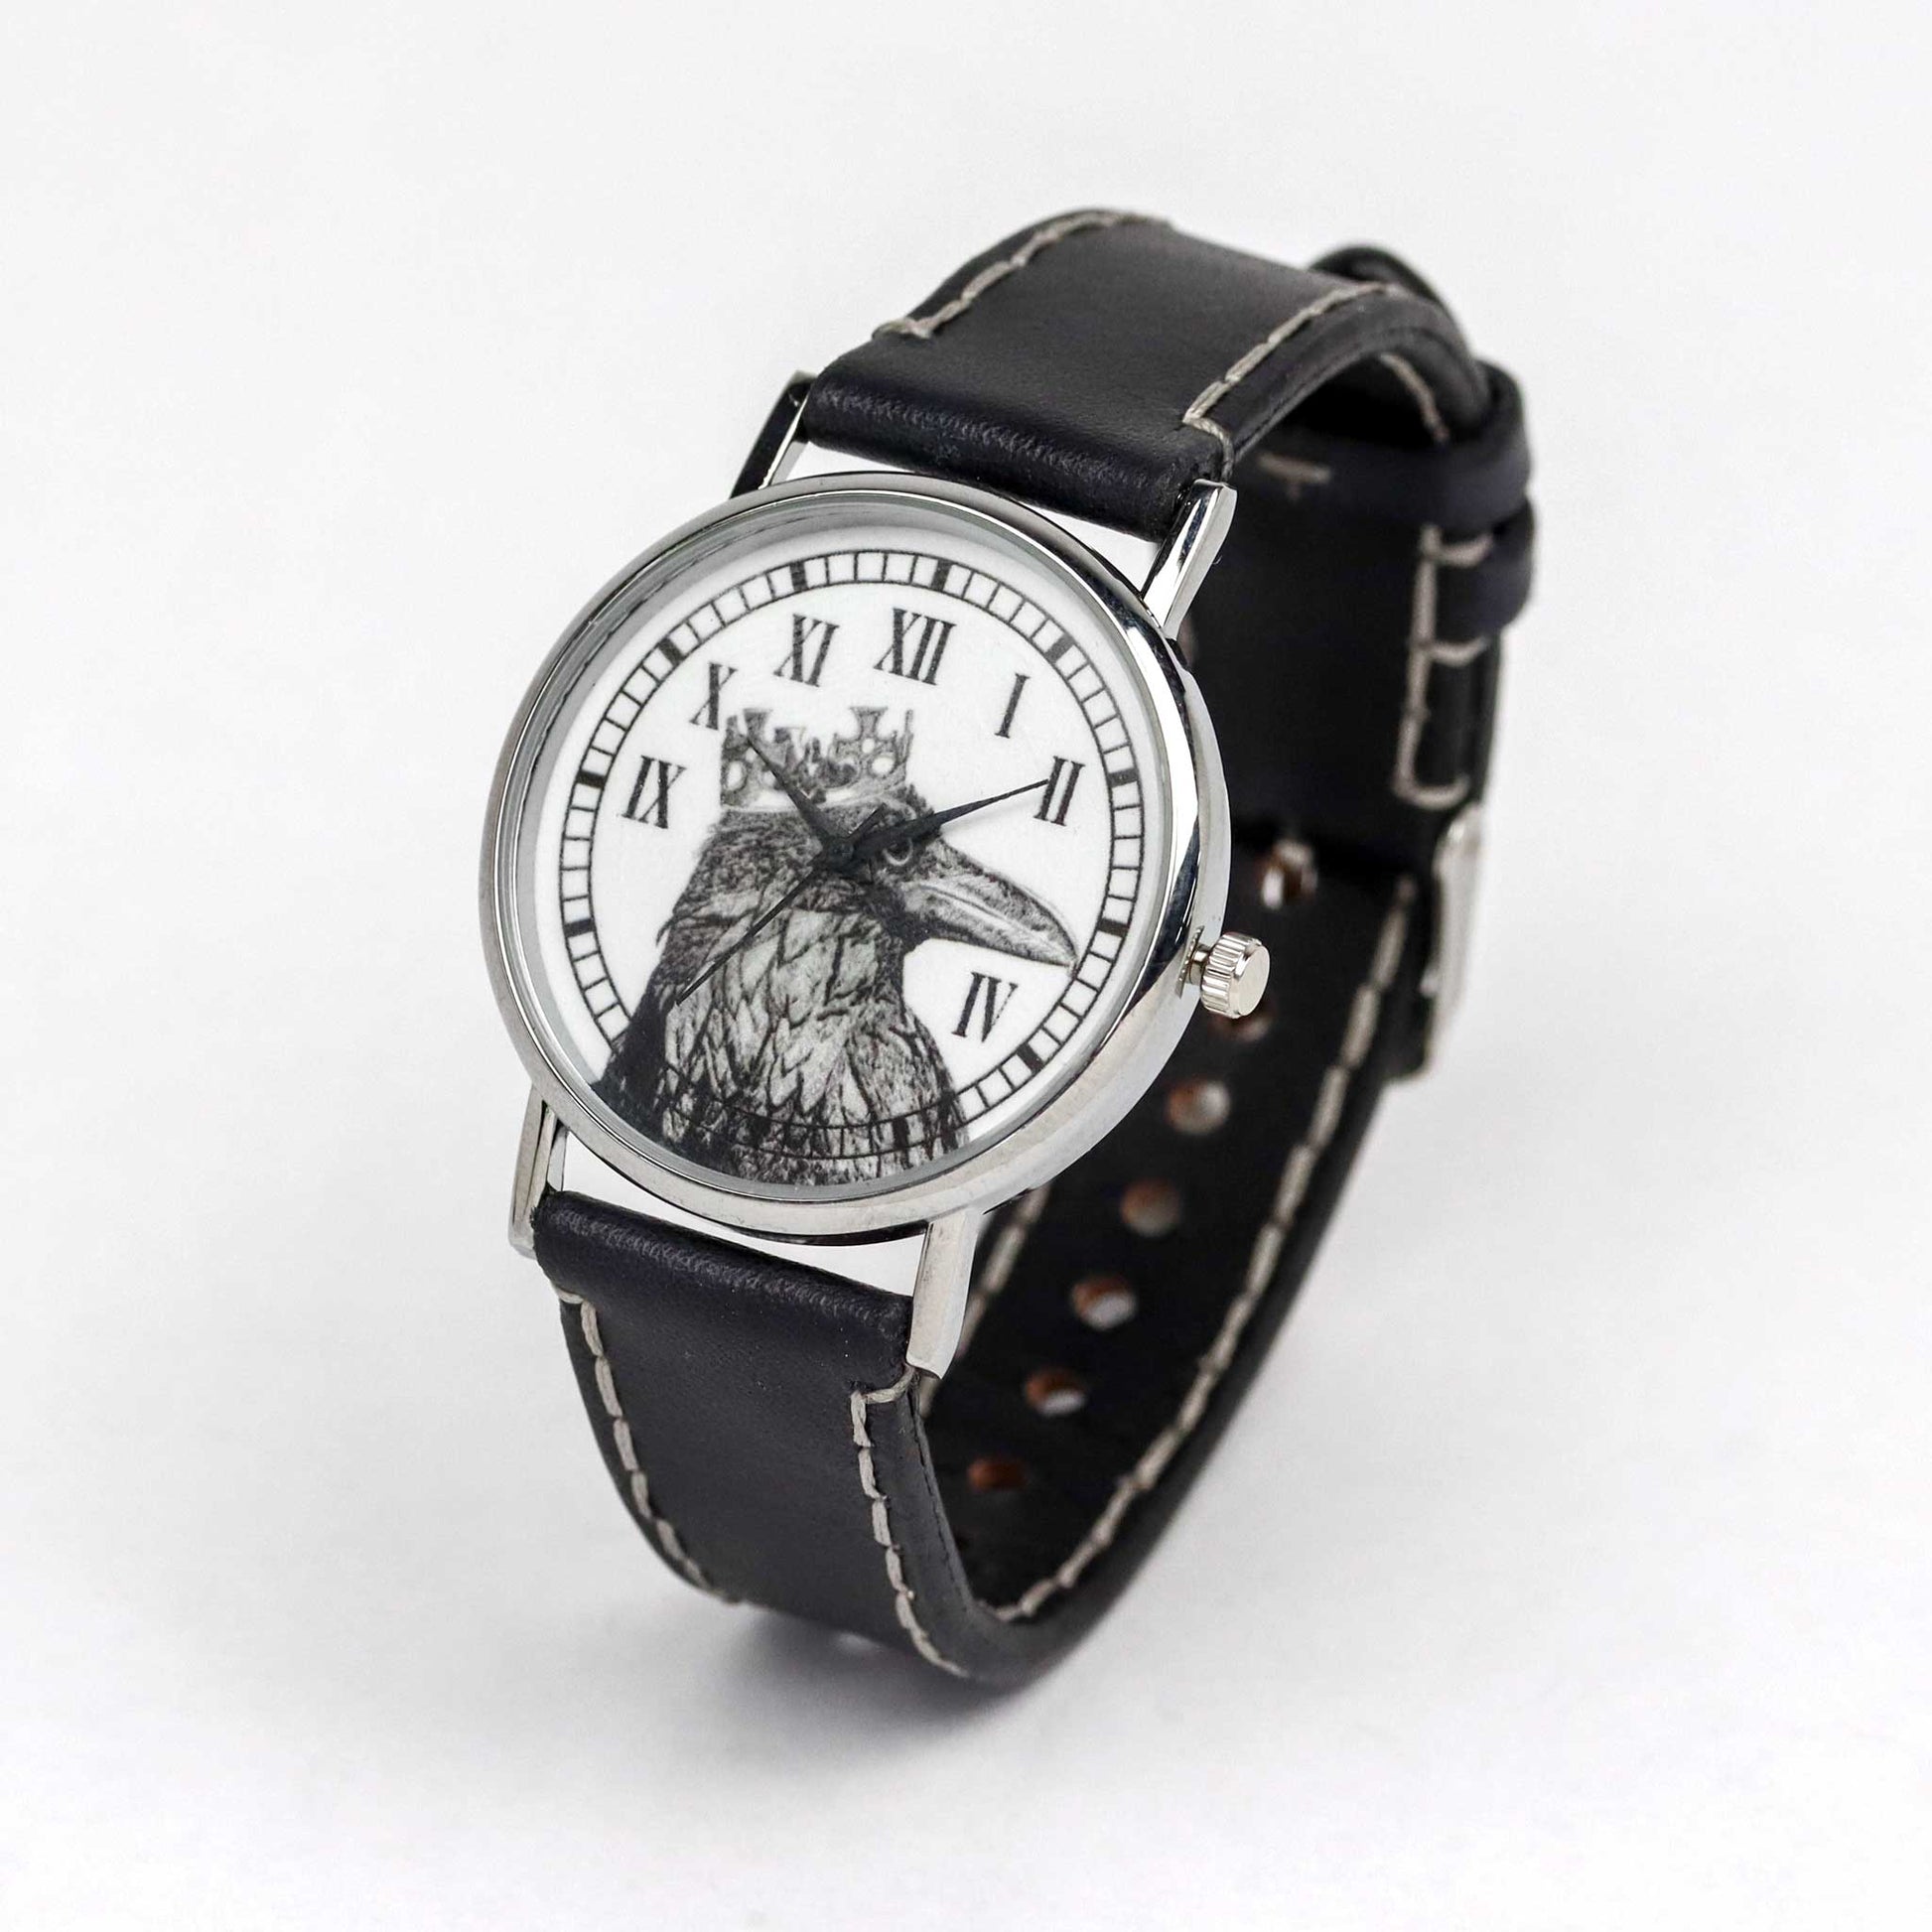 watch with a raven and crown on the dial and black strap